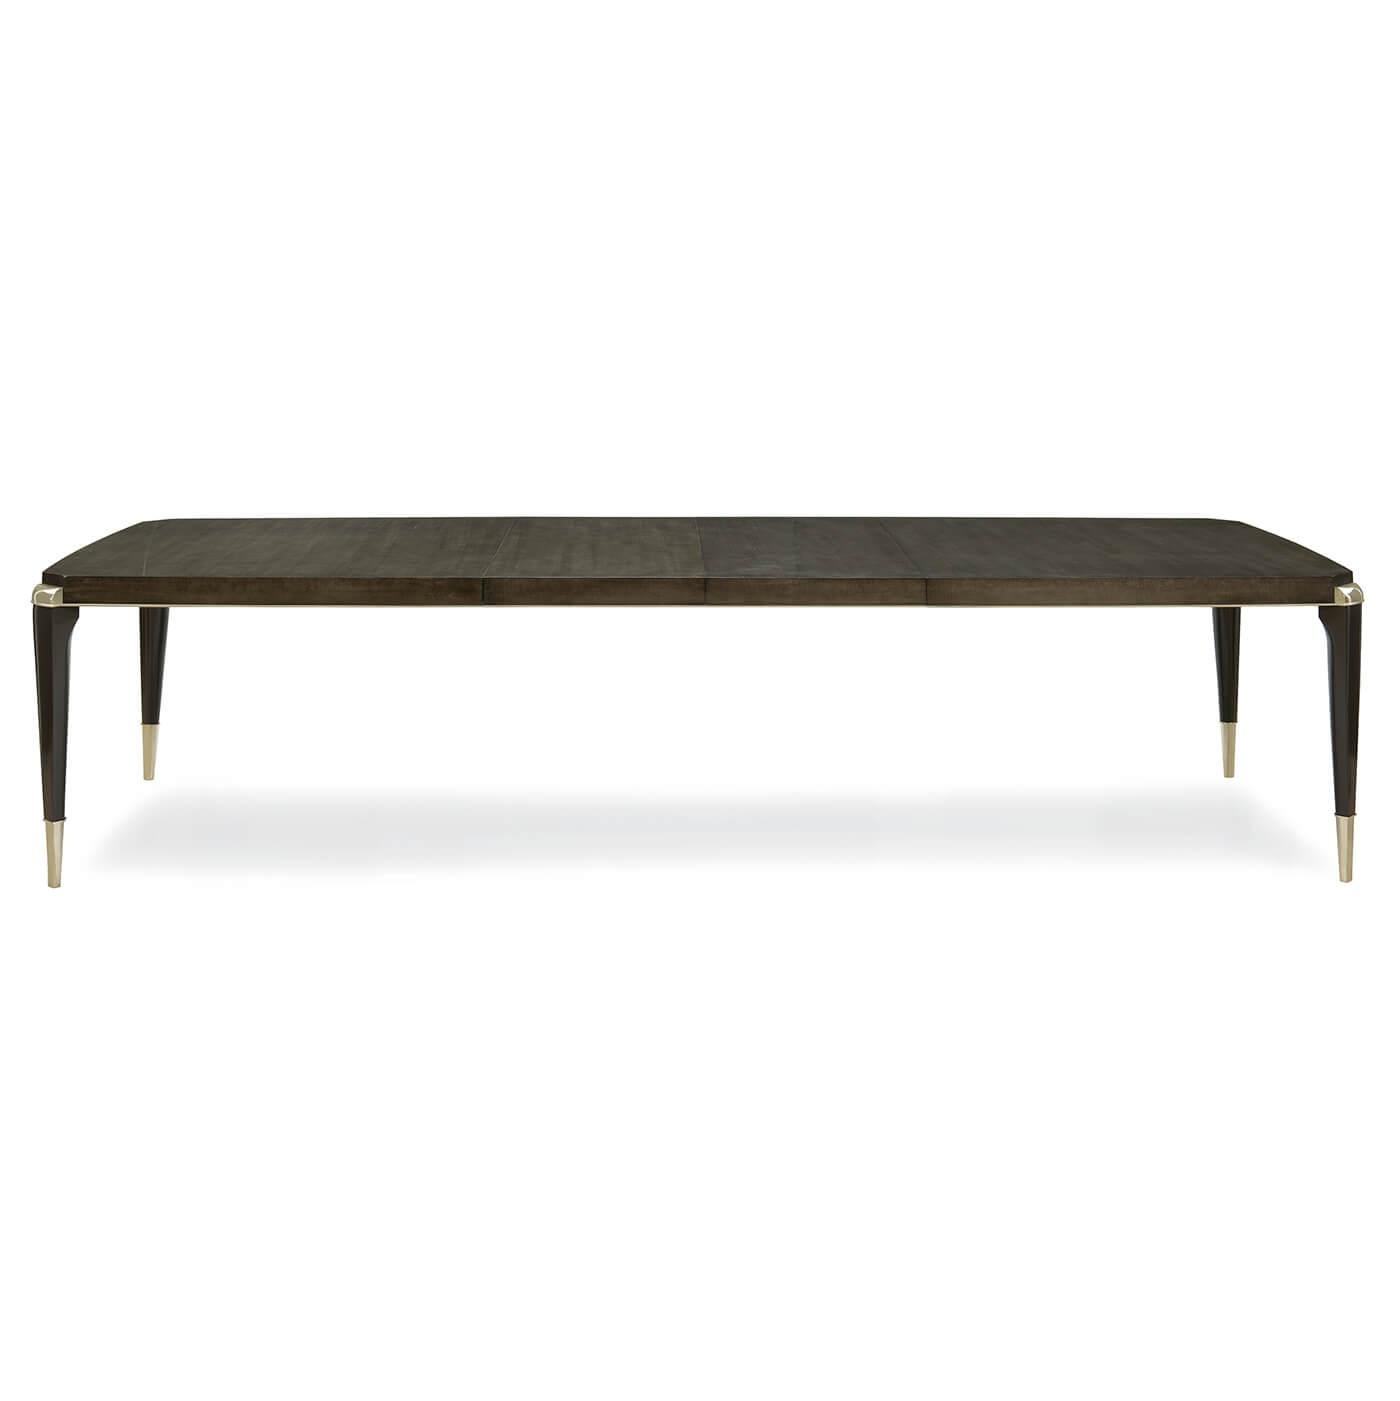 Asian Art Deco Style Extendable Dining Table For Sale